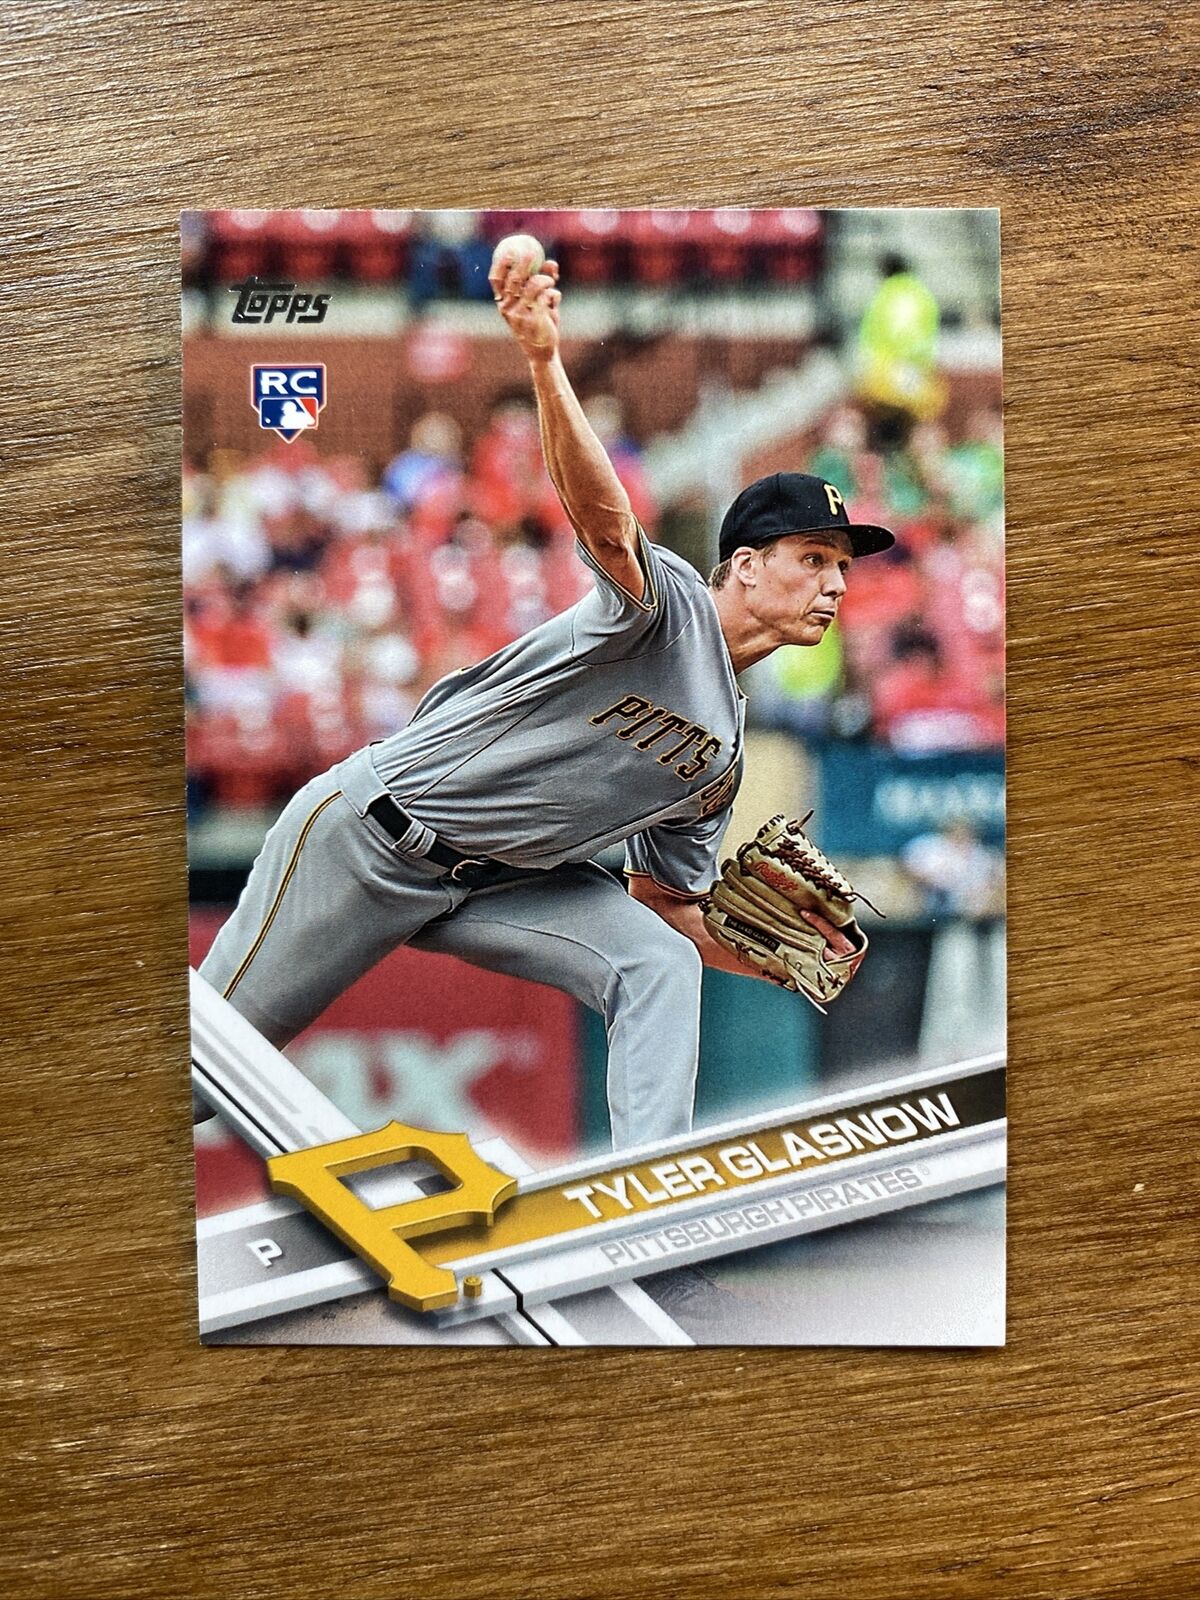 2017 Topps Series 1 #349 Tyler Glasnow RC Rookie Card Pittsburgh Pirates